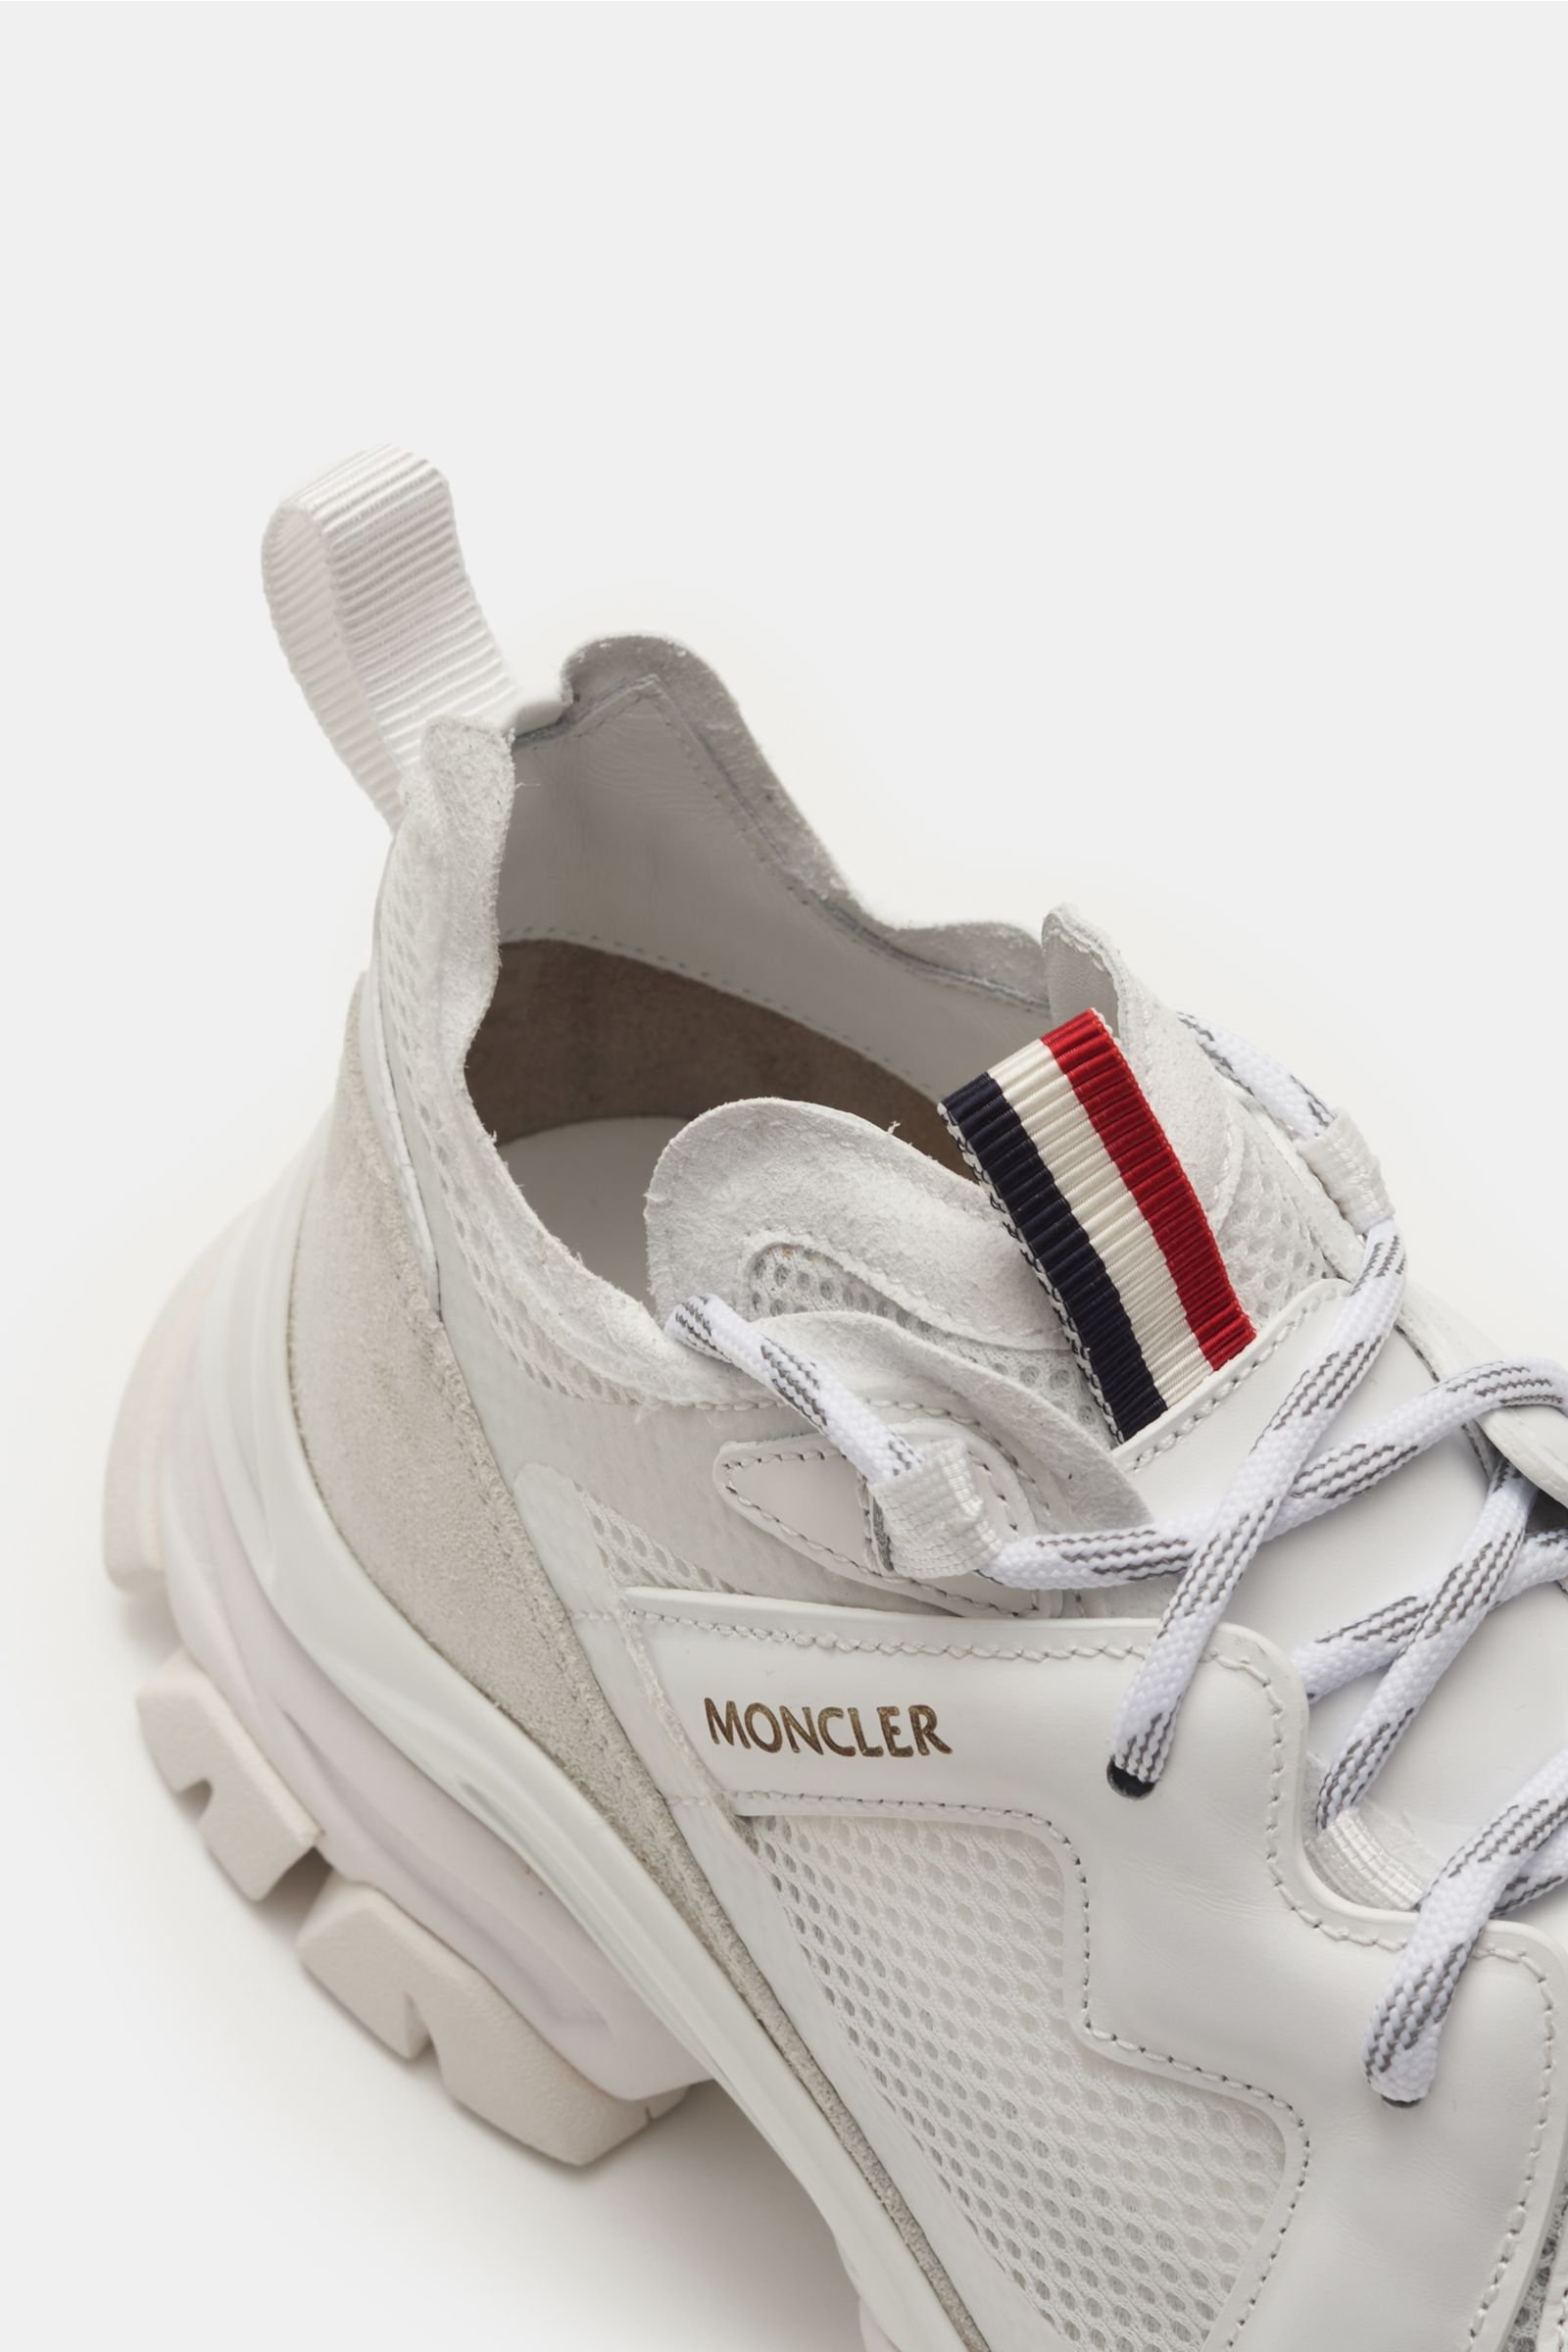 moncler shoes white